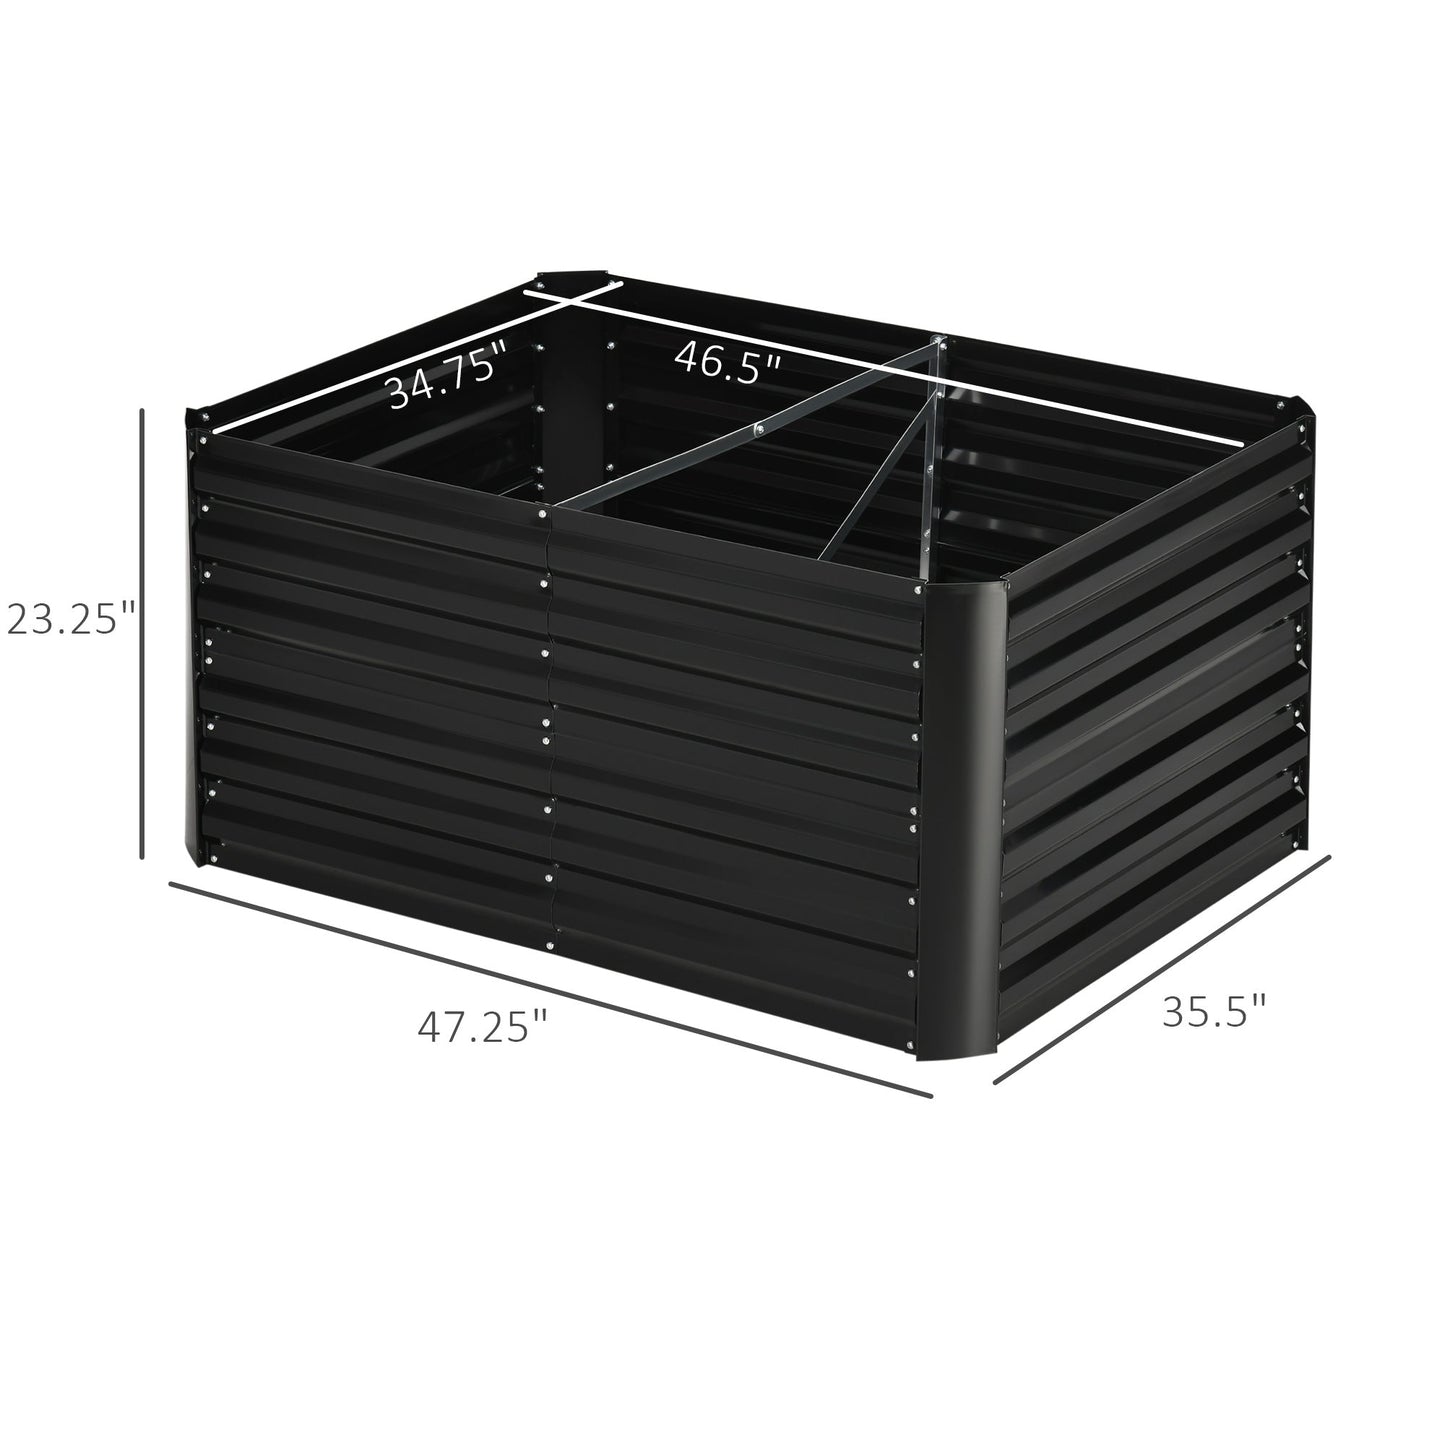 Outdoor and Garden-4' x 3' x 2' Raised Garden Bed with Support Rod, Steel Frame Elevated Planter Box, Black - Outdoor Style Company